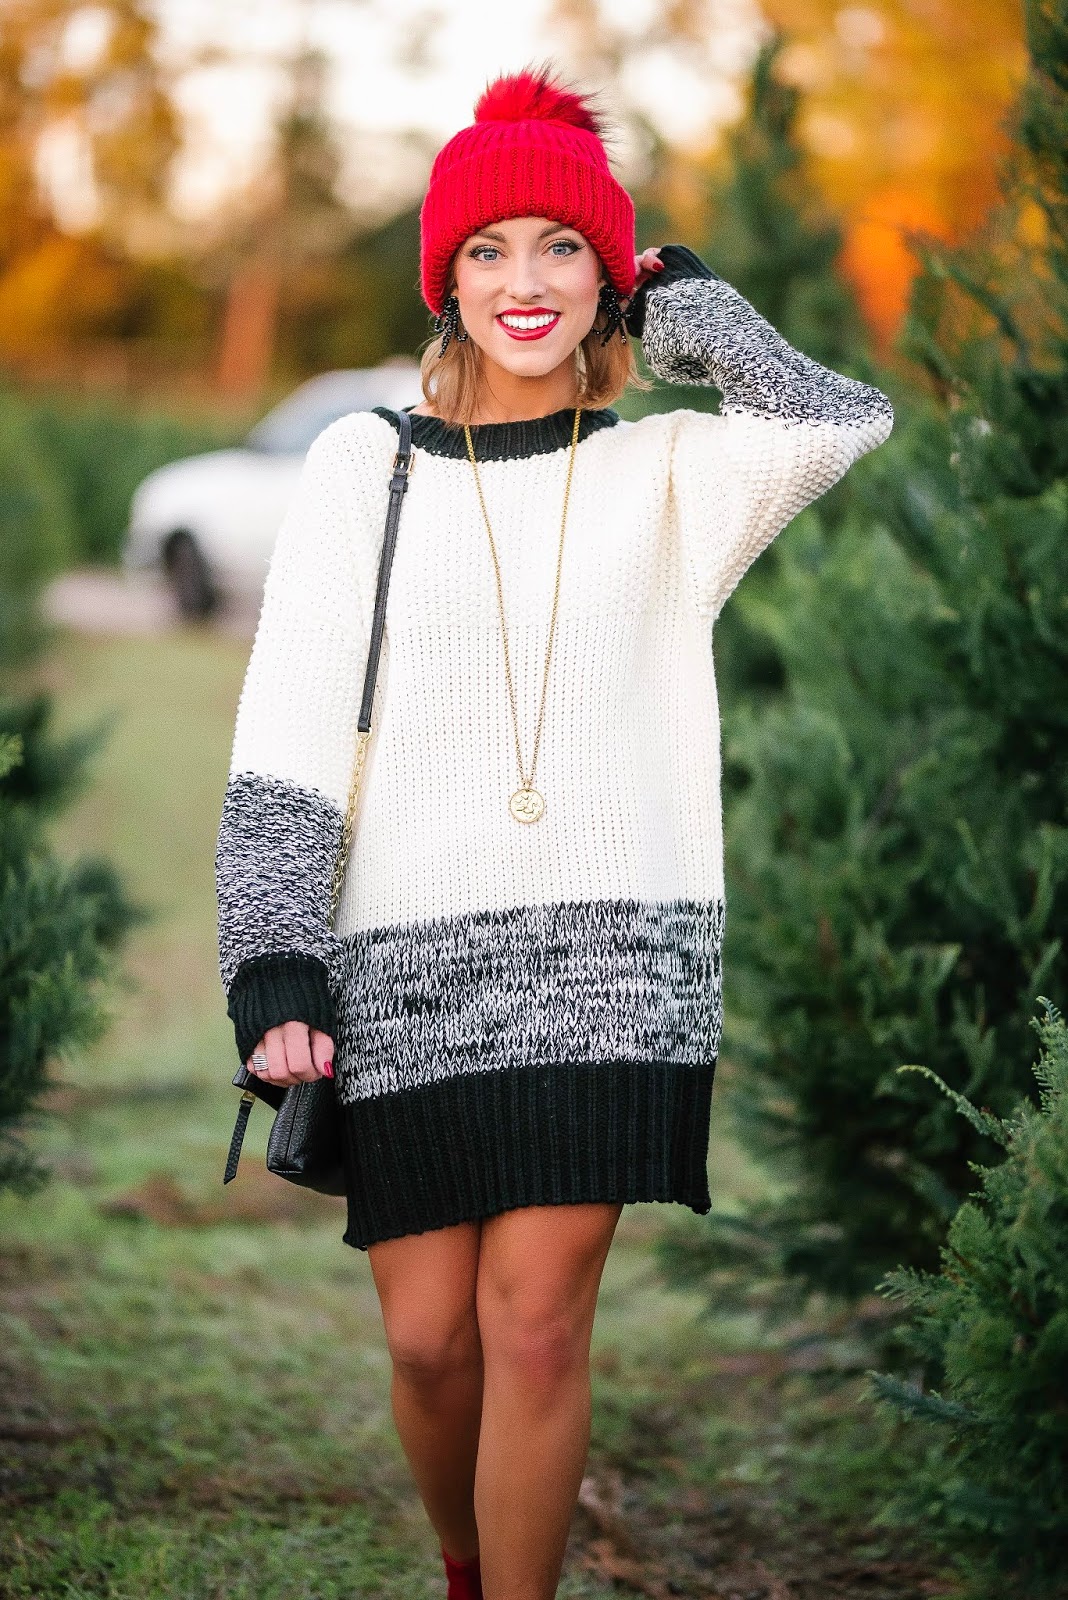 Under $50 Black & White Sweater Dress With Red Accessories - Something Delightful Blog